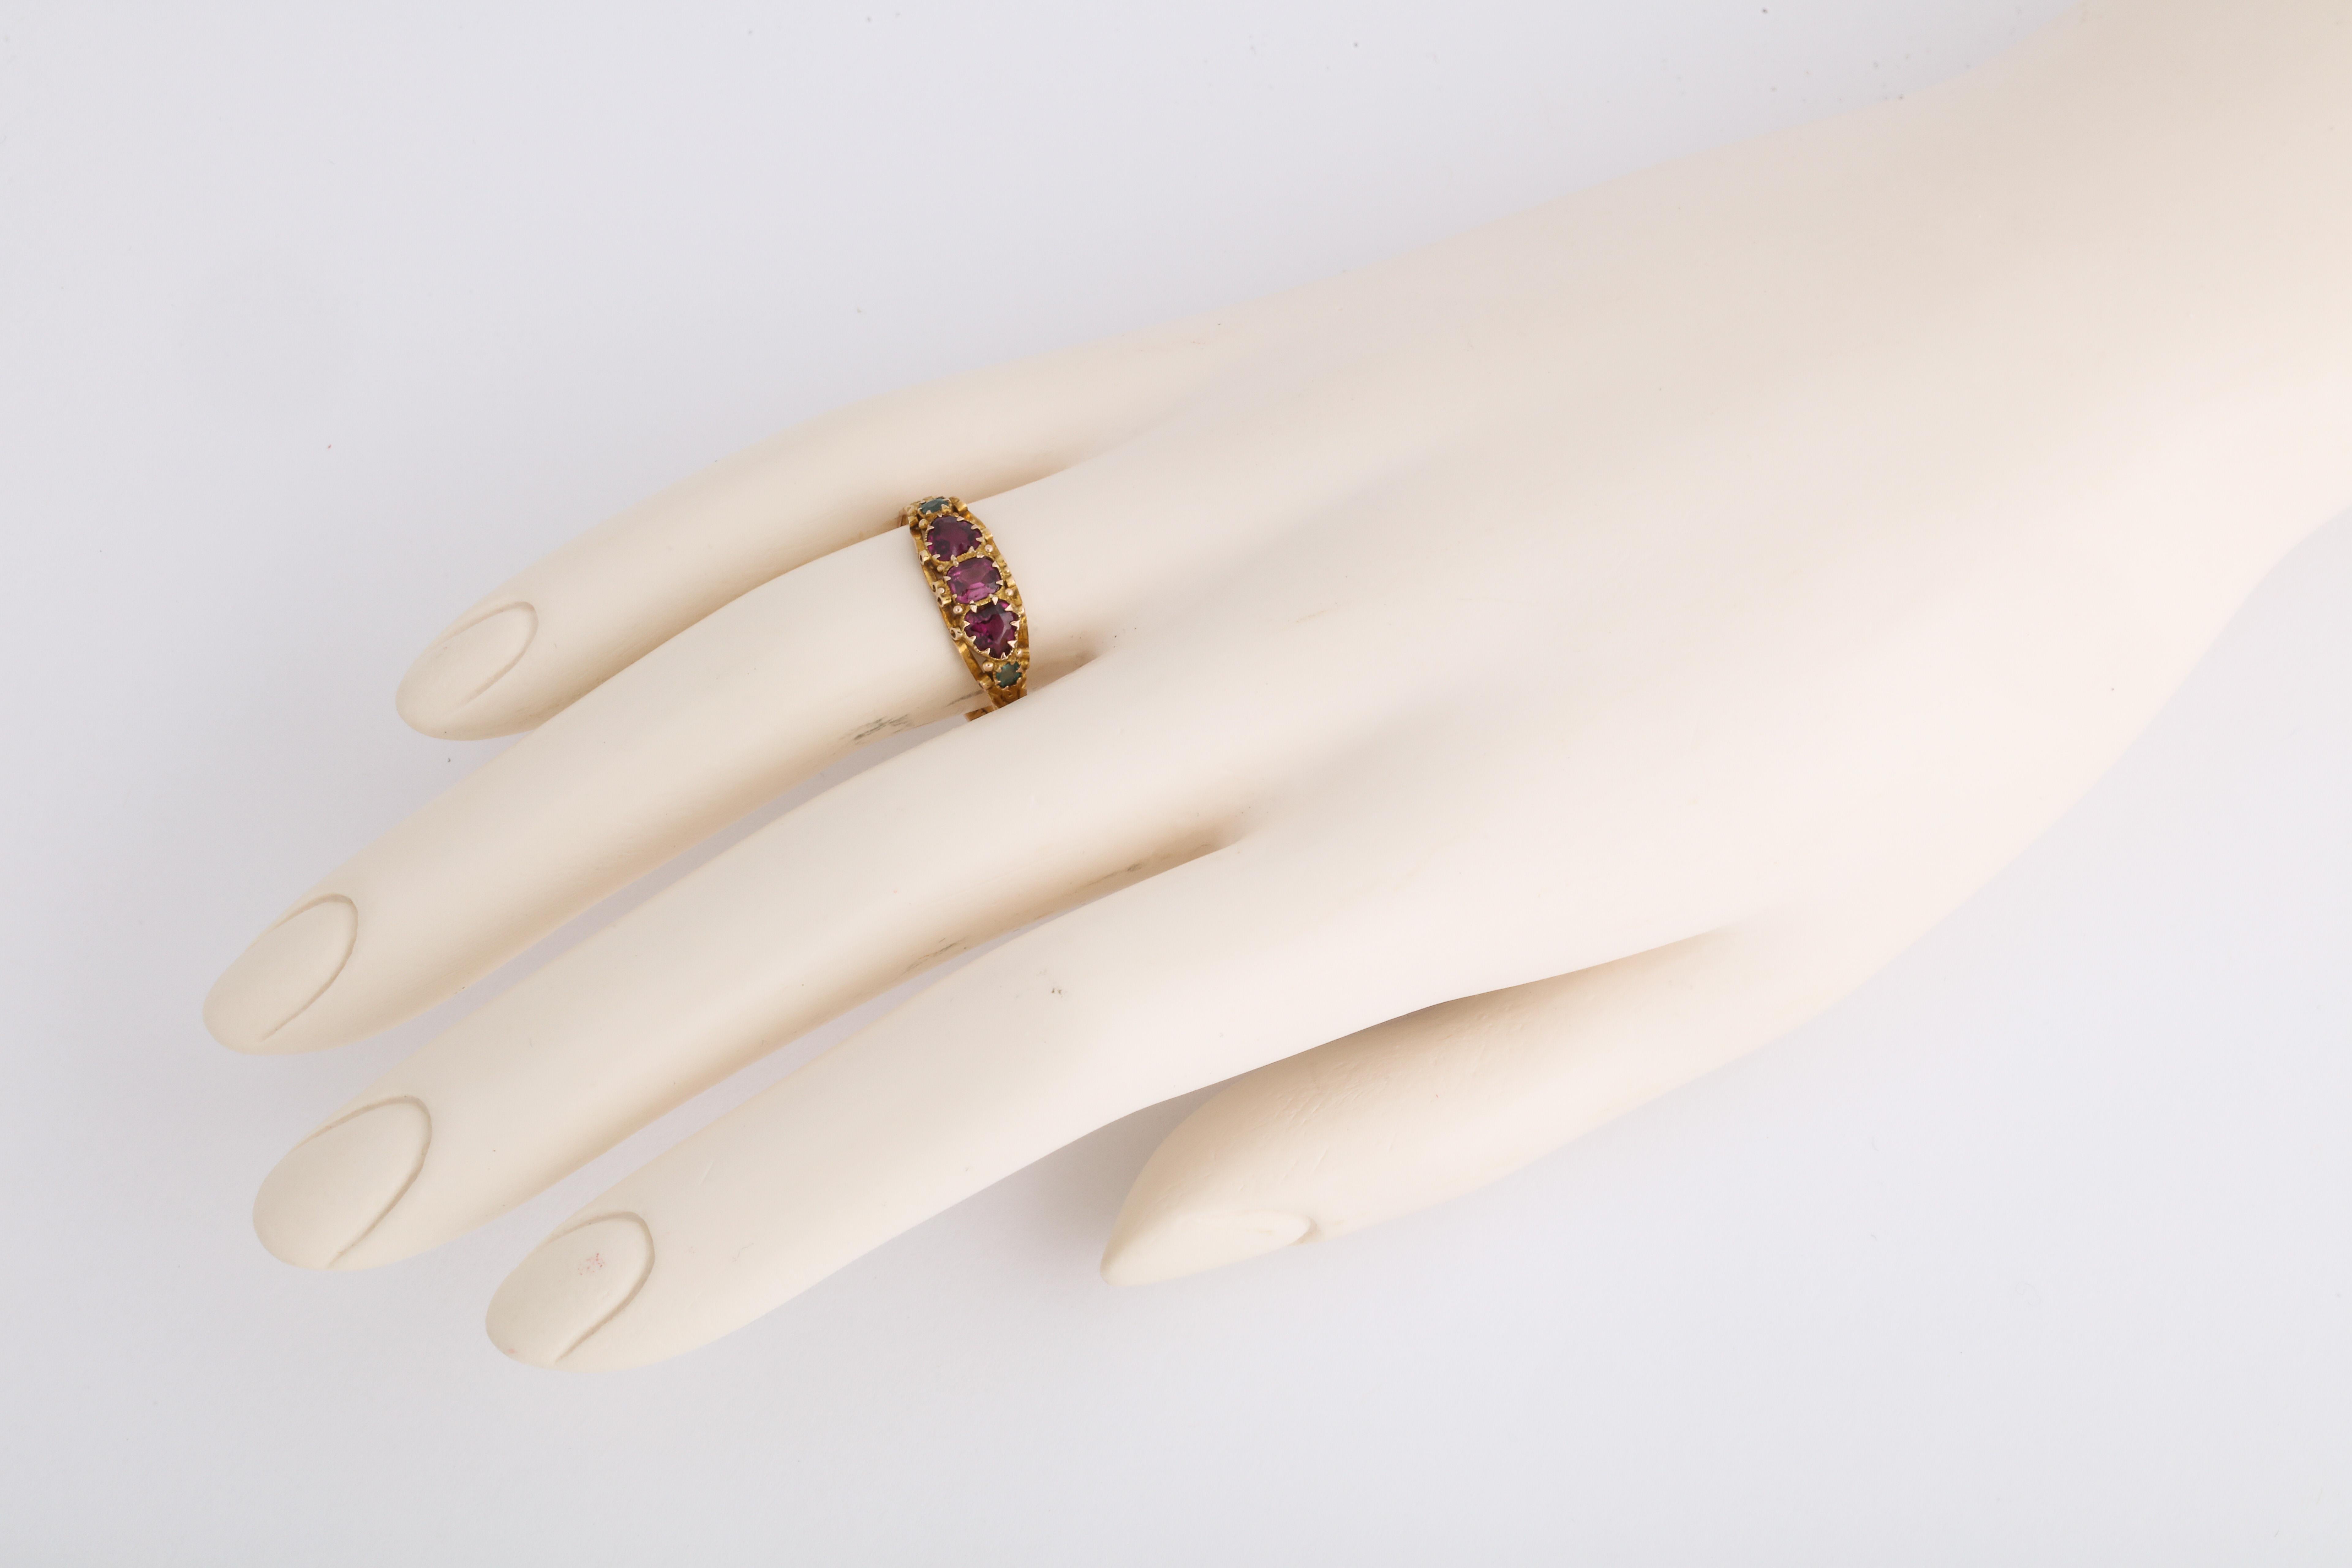 Set with a central oval cut garnet flanked by a heart shaped garnet and a small faceted emerald on each side, mounted in 15kt yellow gold decorated with scrolls and engraved motifs all around the shank, in intact original condition 

England, fully